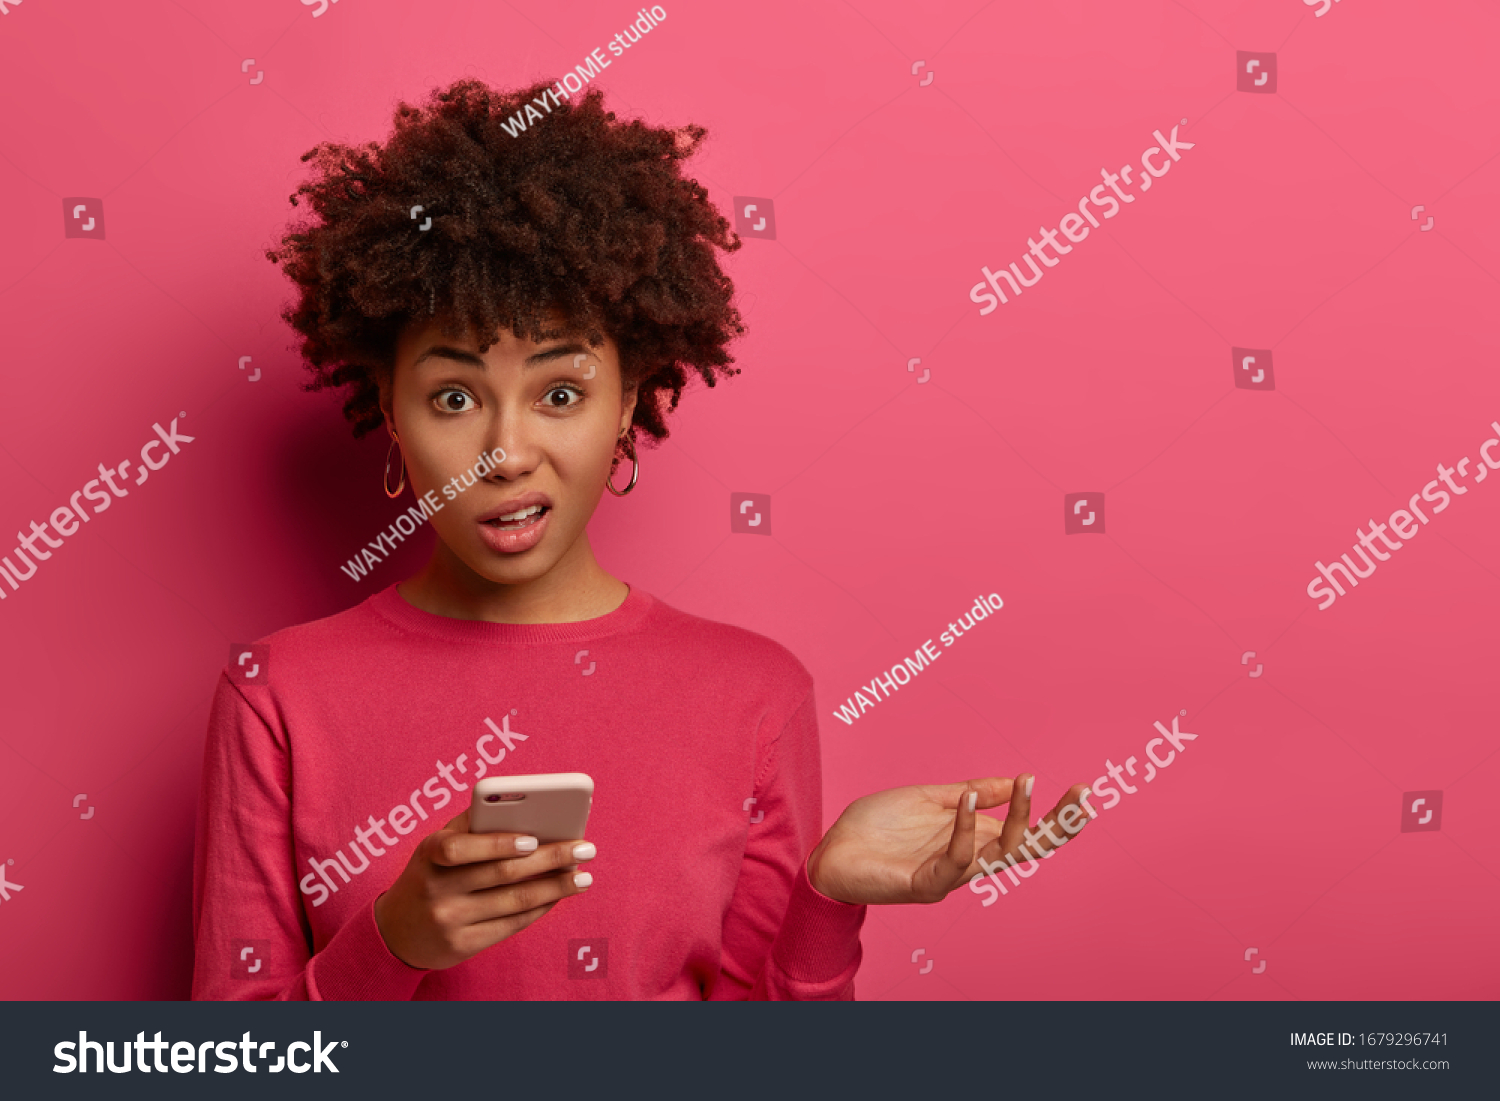 Distrubed dark skinned woman has problematic concerned face expression, holds smartphone, raises palm, cannot understand whats wrong, strange meaning of message, shrugs shoulders, stands indoor #1679296741